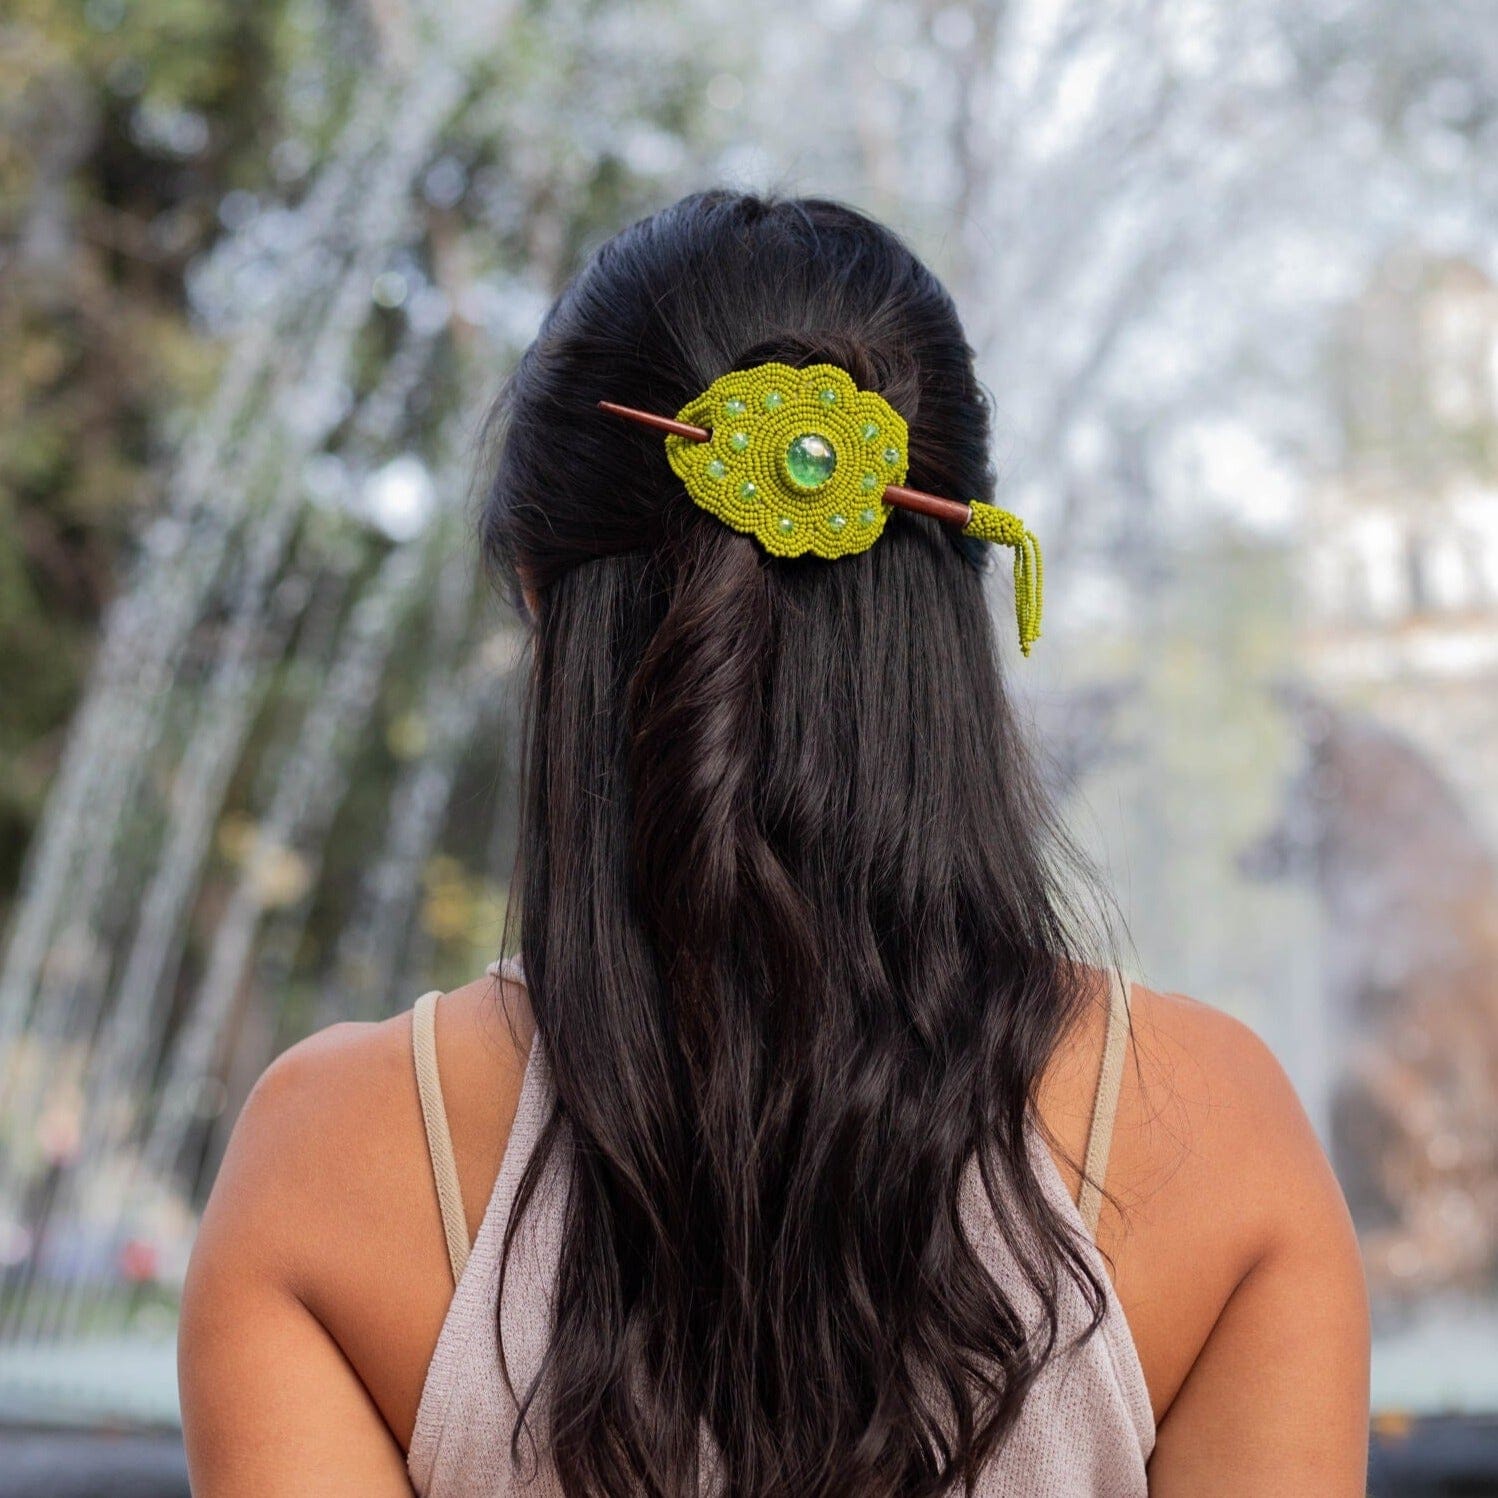 A woman wearing a key lime green beaded hair barrette and pin, a statement piece of Native American jewelry.